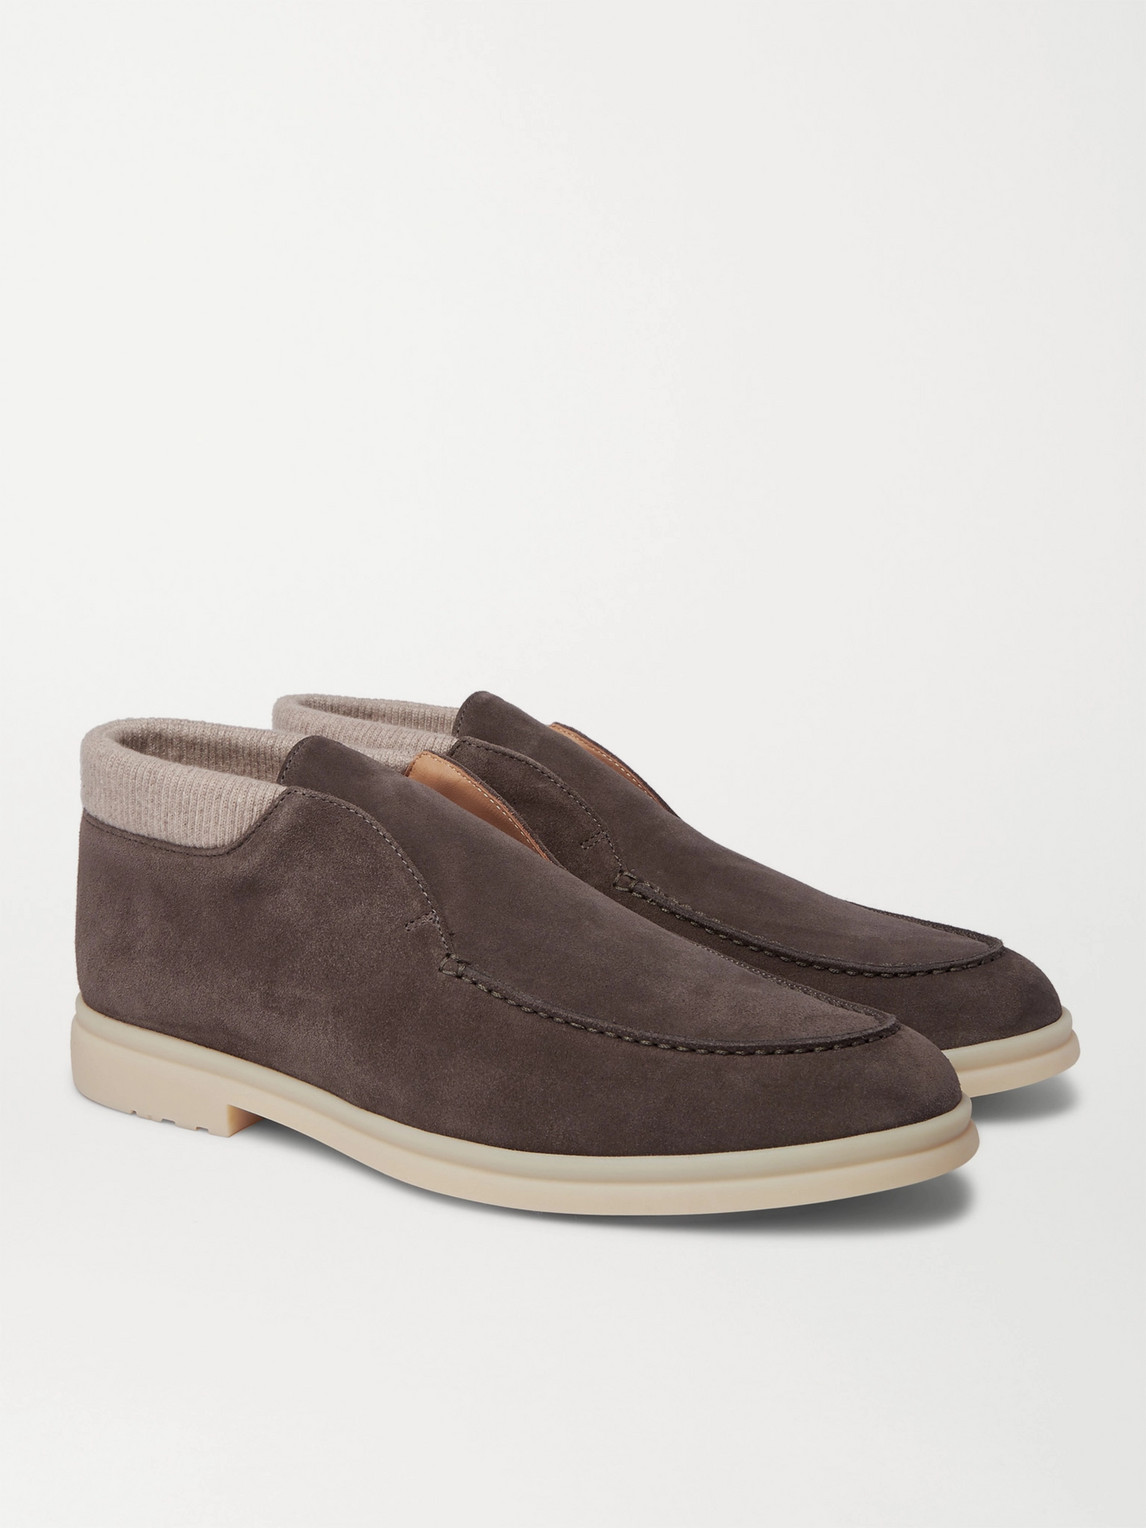 LORO PIANA OPEN WINTERY WALK CASHMERE-TRIMMED SUEDE BOOTS